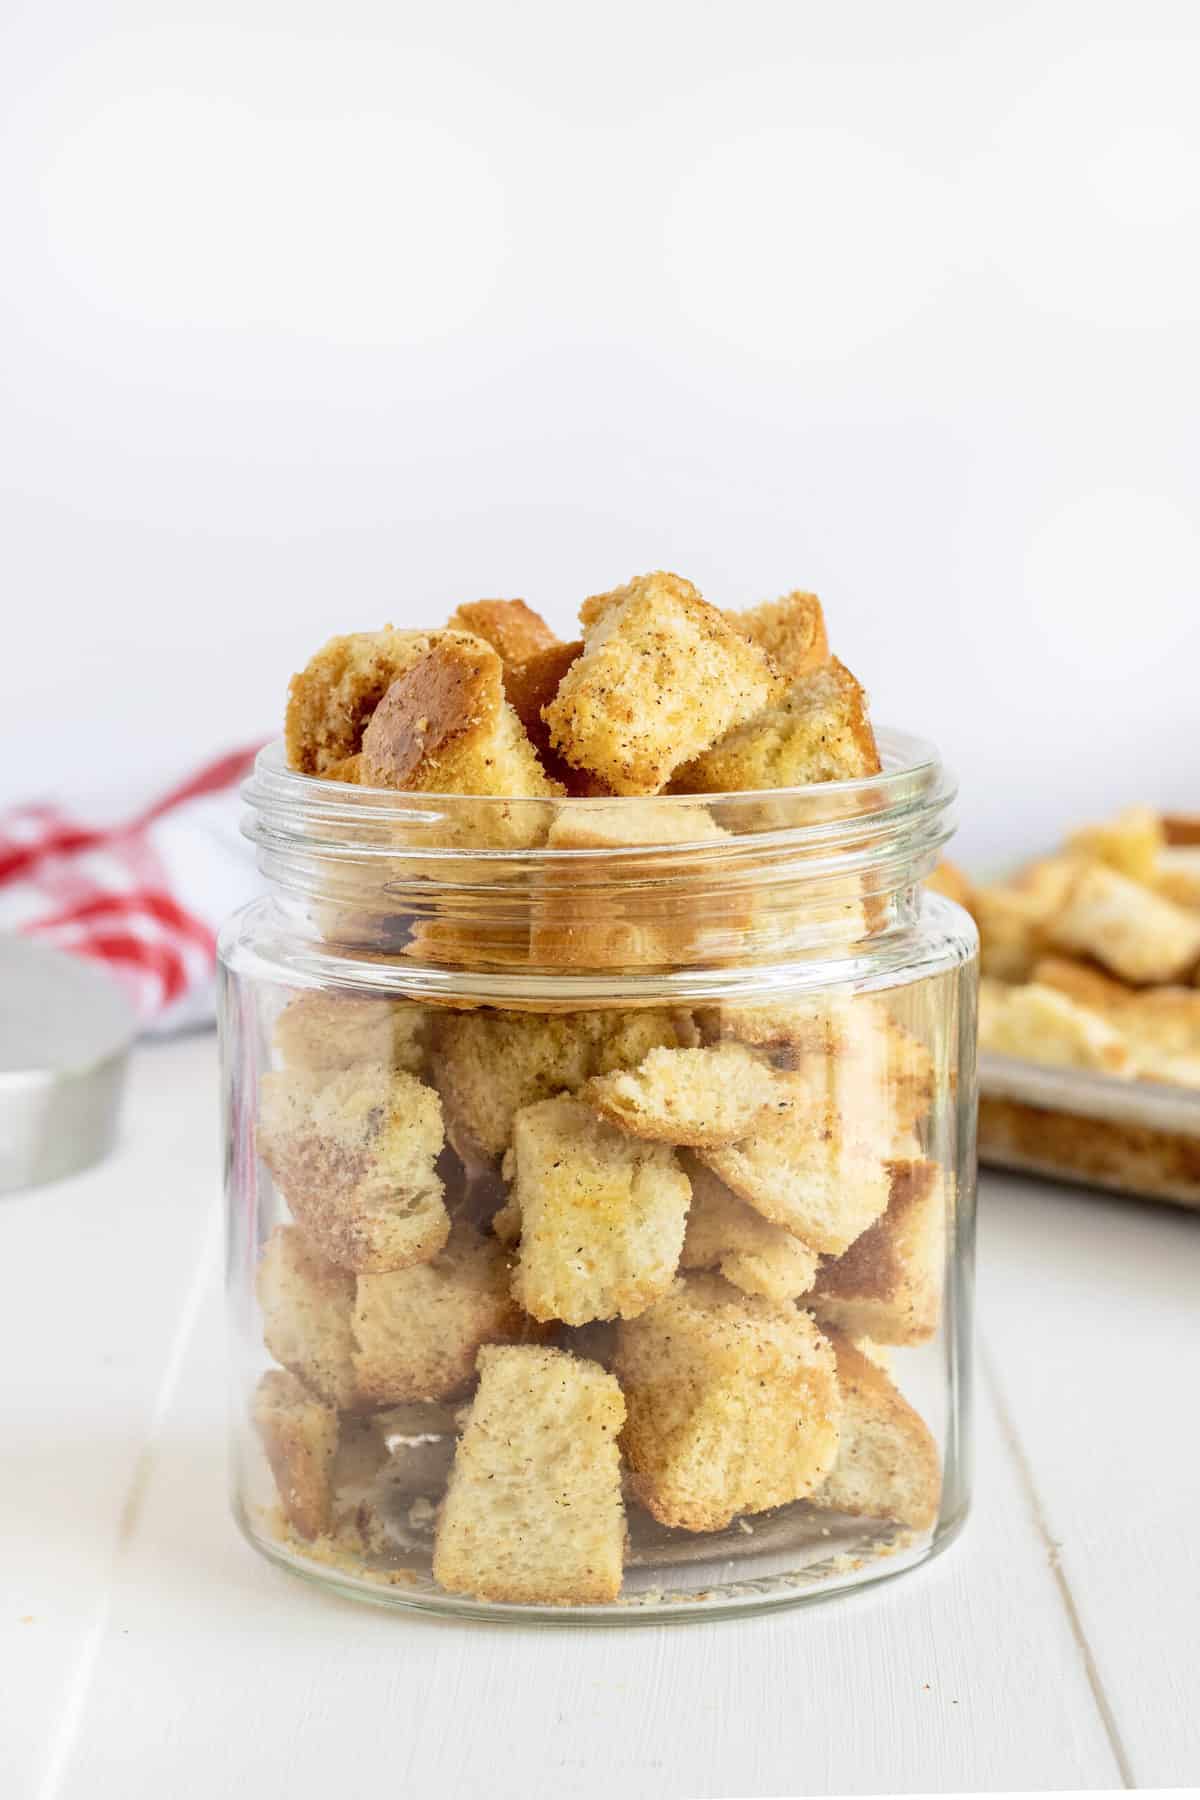 Homemade Croutons by The BakerMama